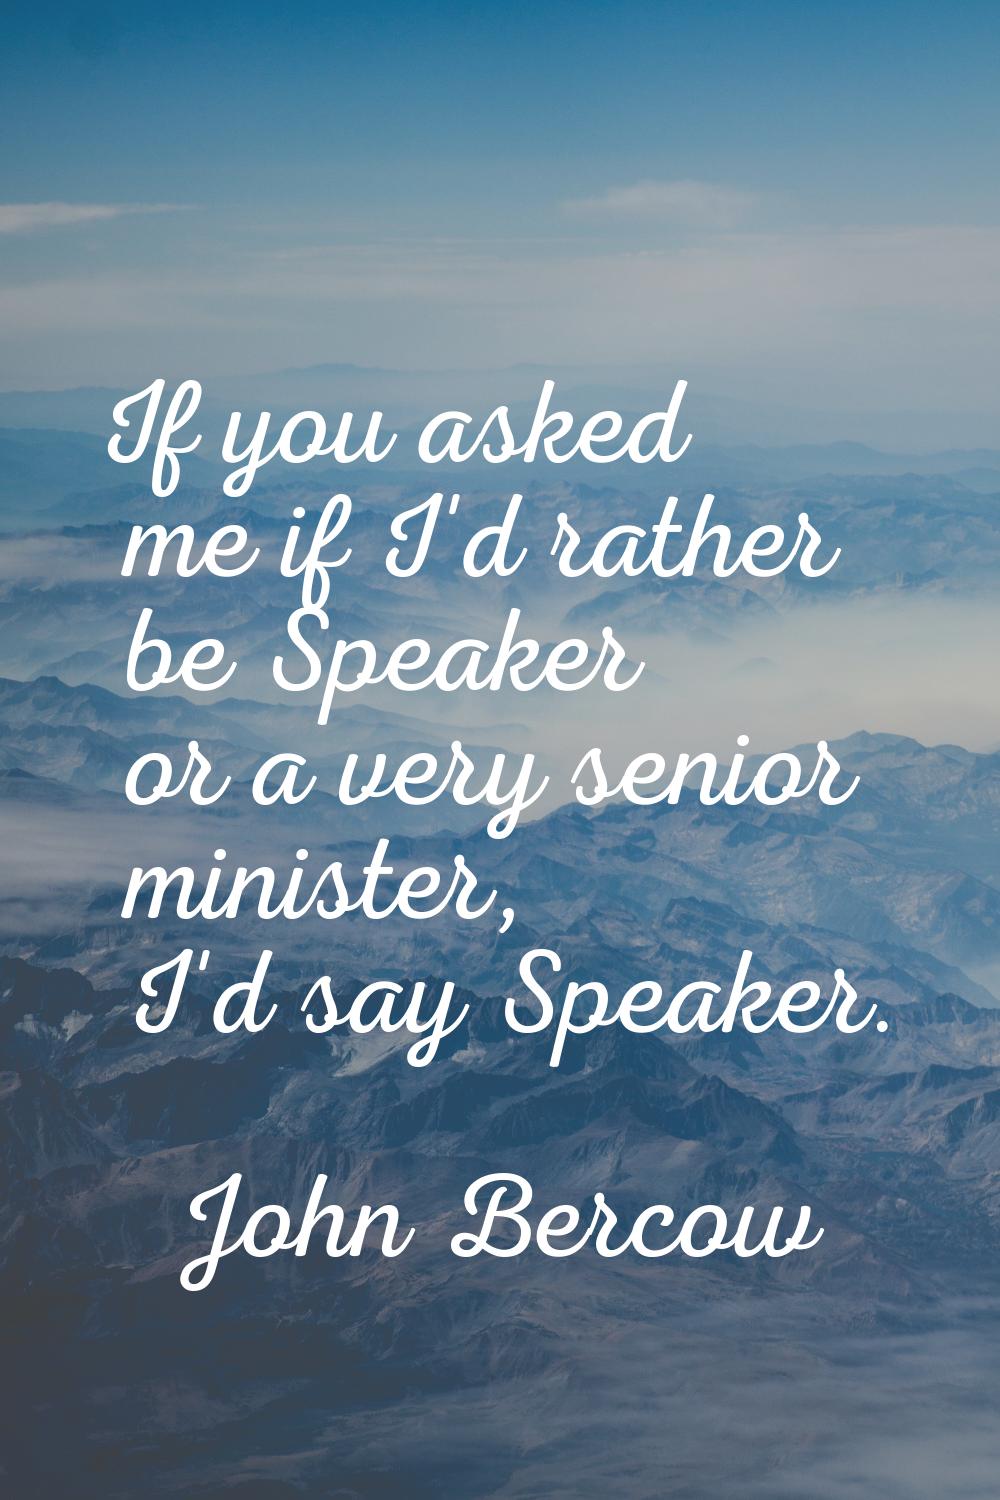 If you asked me if I'd rather be Speaker or a very senior minister, I'd say Speaker.